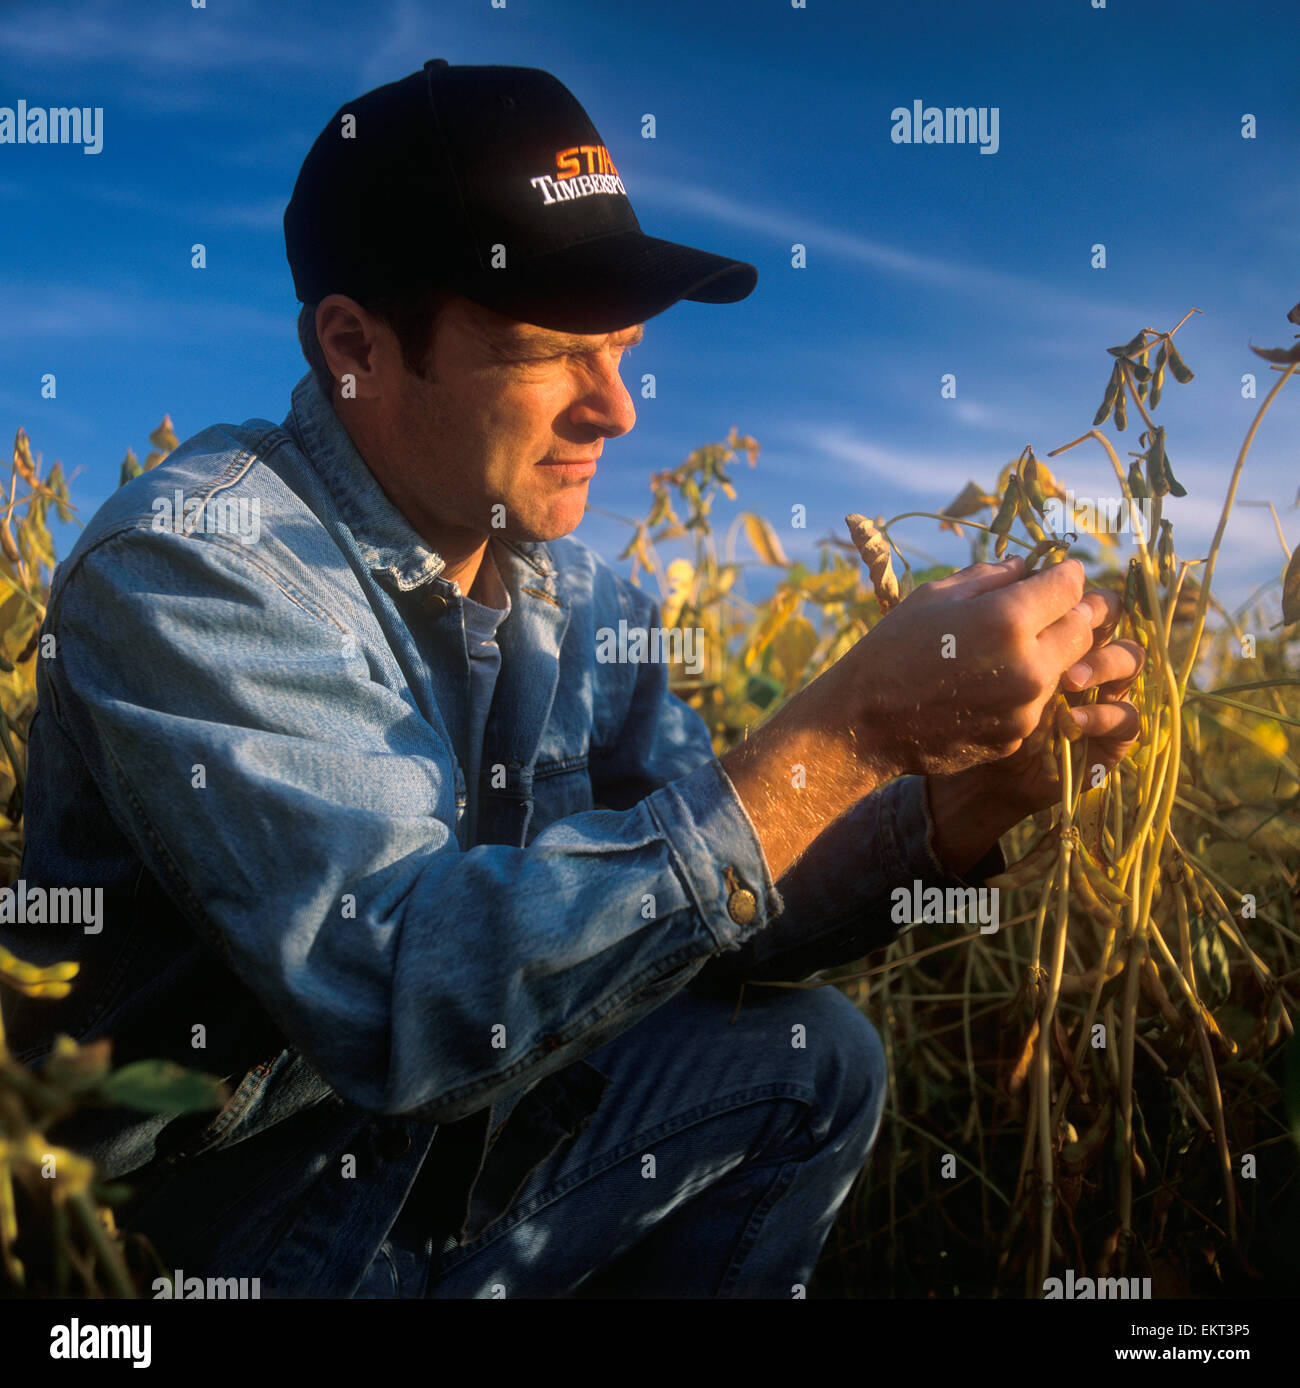 Agriculture - A farmer inspects ripening soybean pods to determine when the harvest will begin / Ontario, Canada. Stock Photo